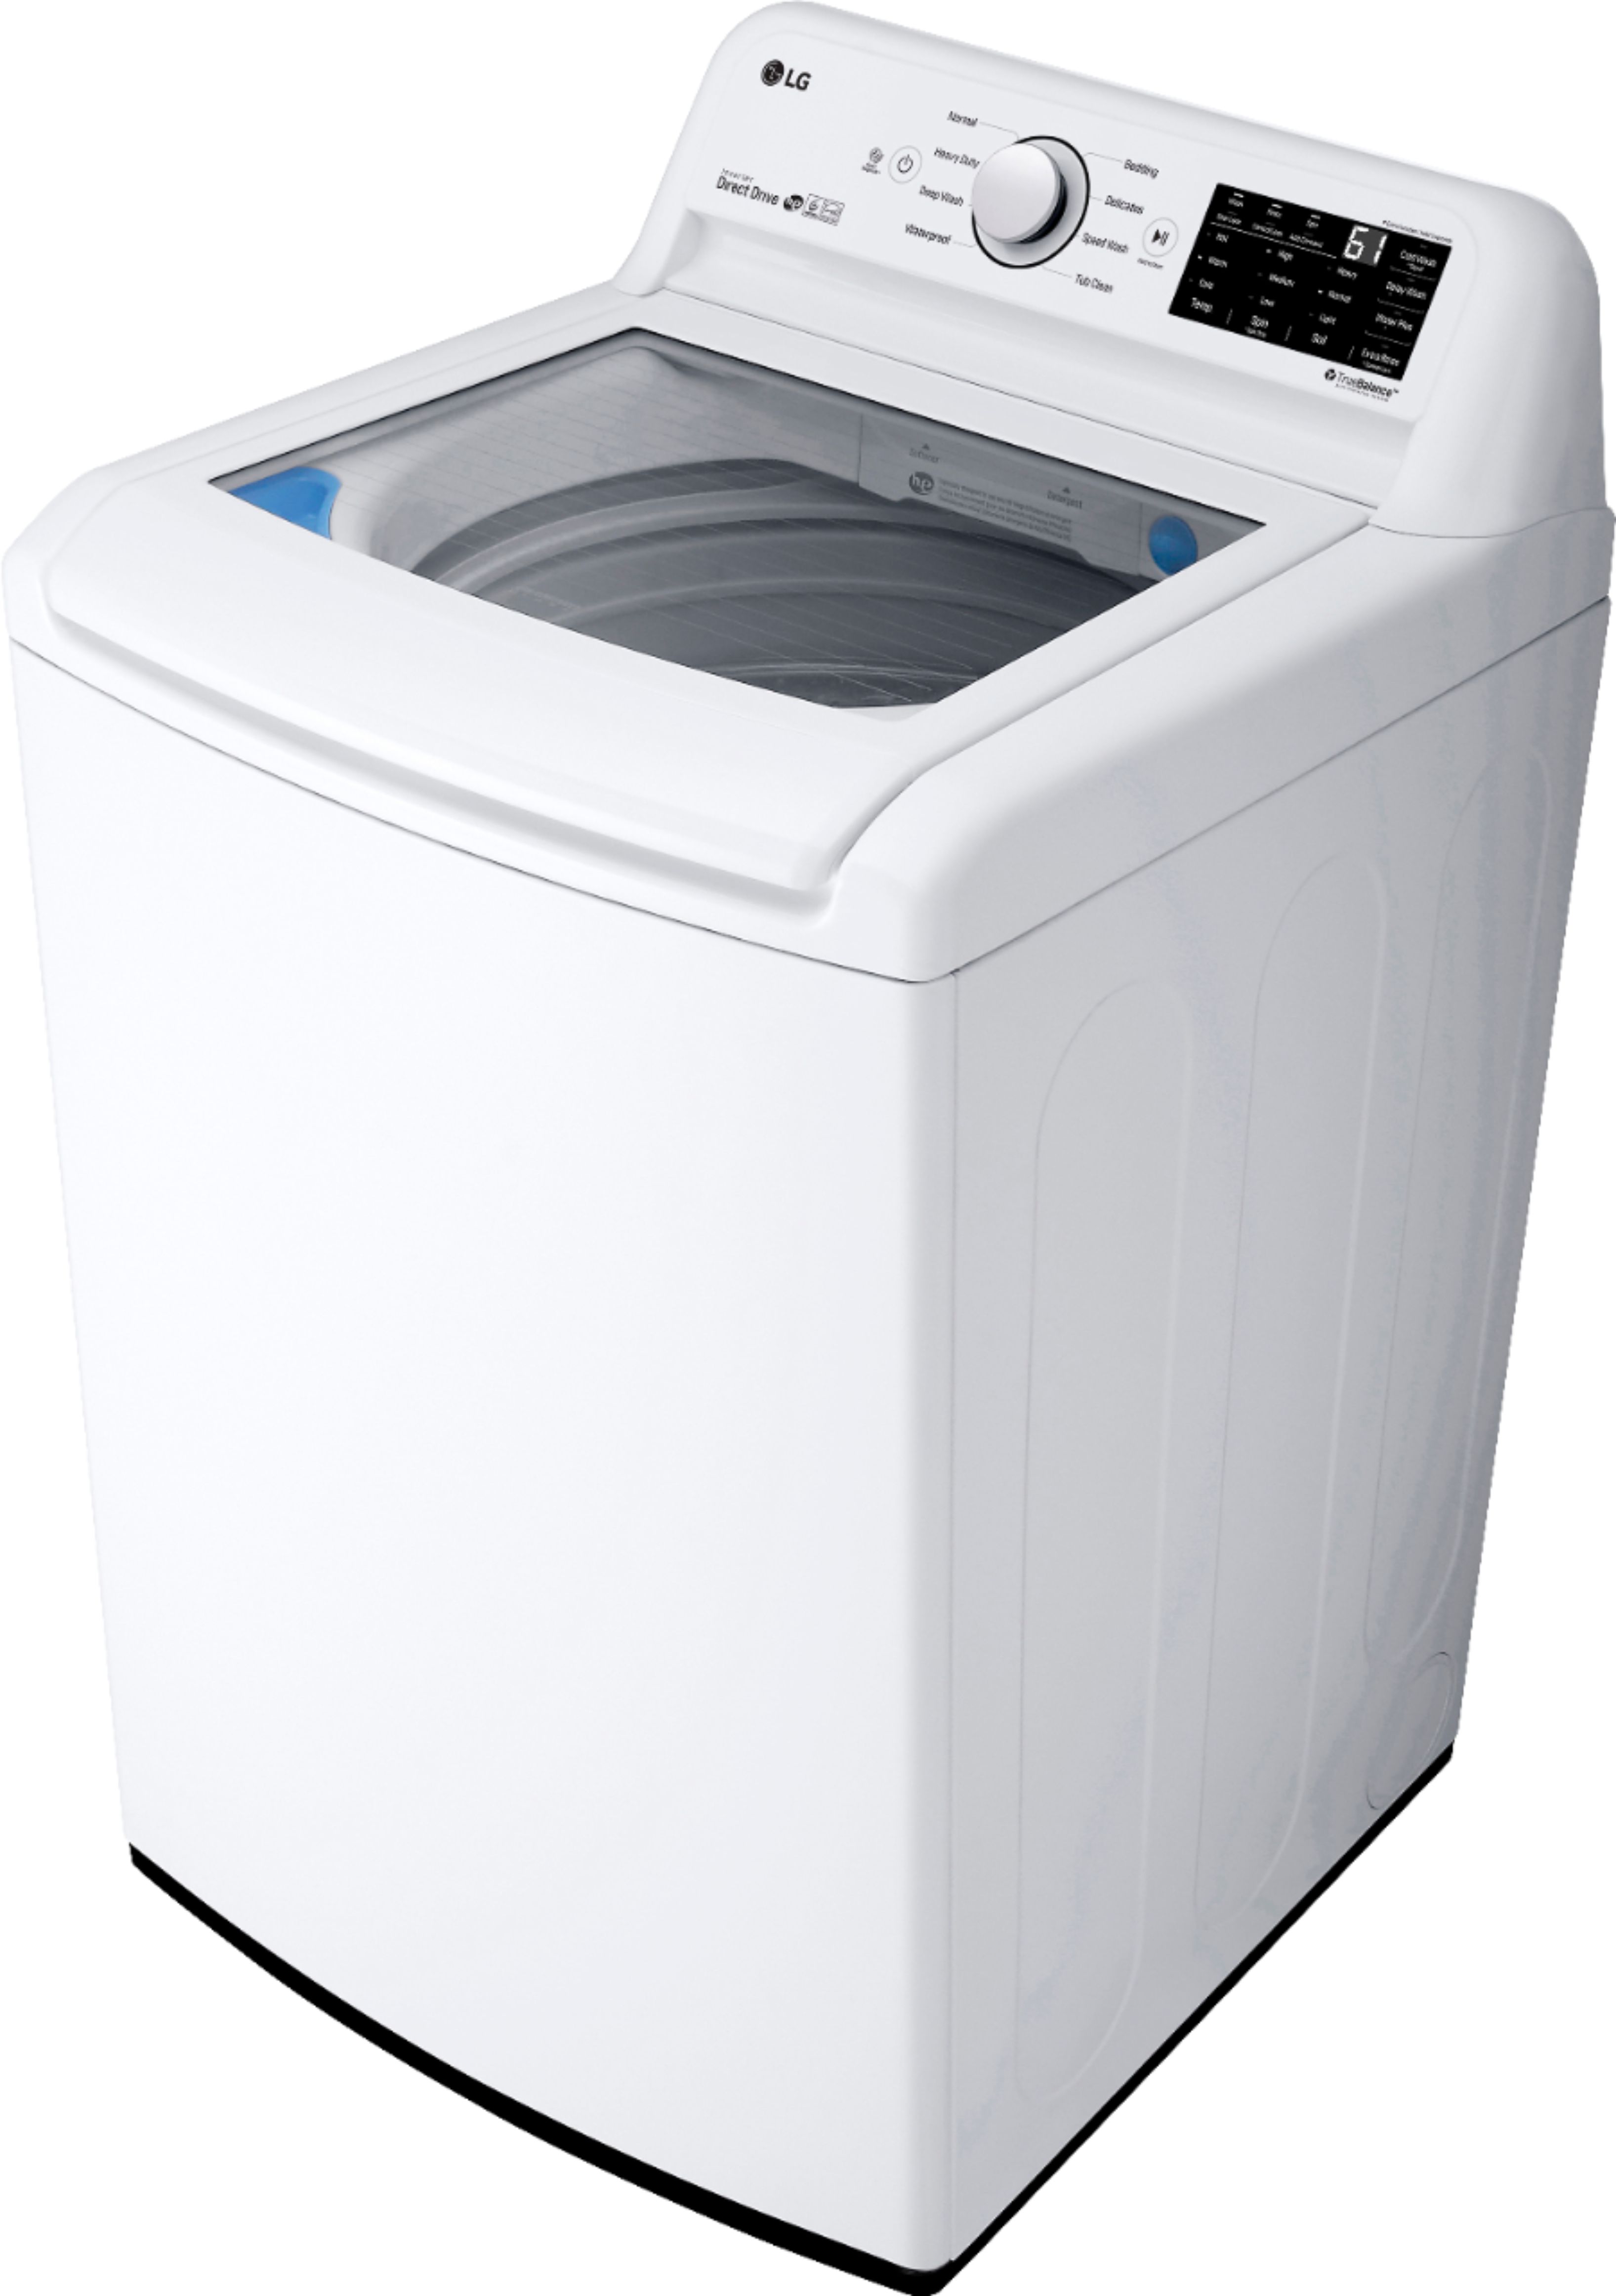 LG 4.5 Cu. Ft. 8Cycle TopLoading Washer with 6Motion Technology White